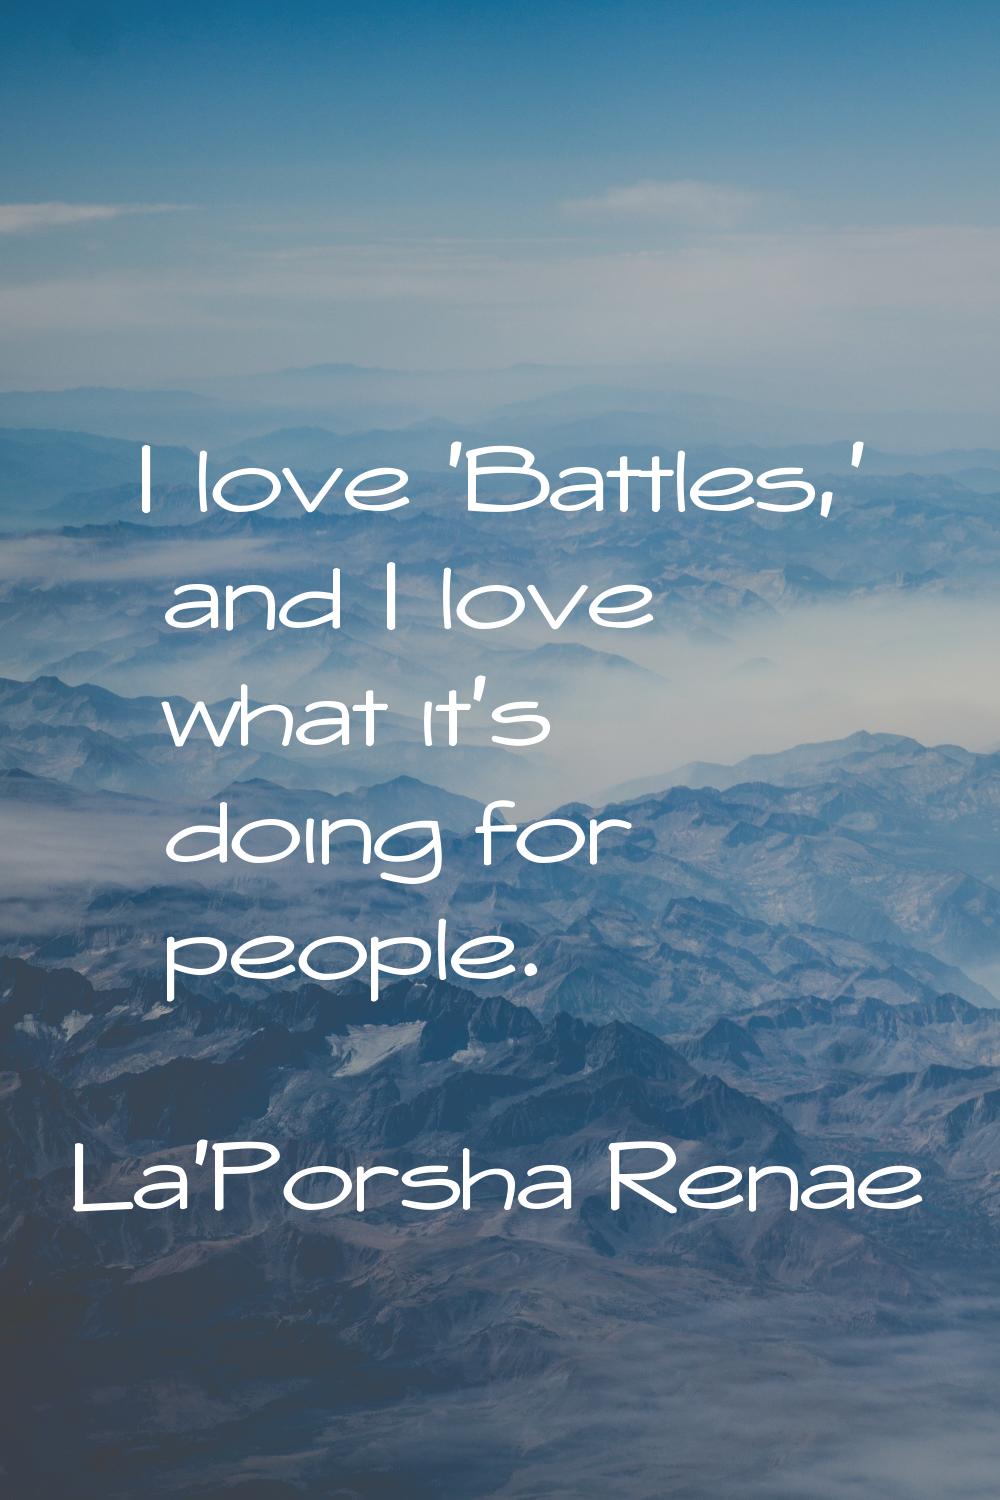 I love 'Battles,' and I love what it's doing for people.